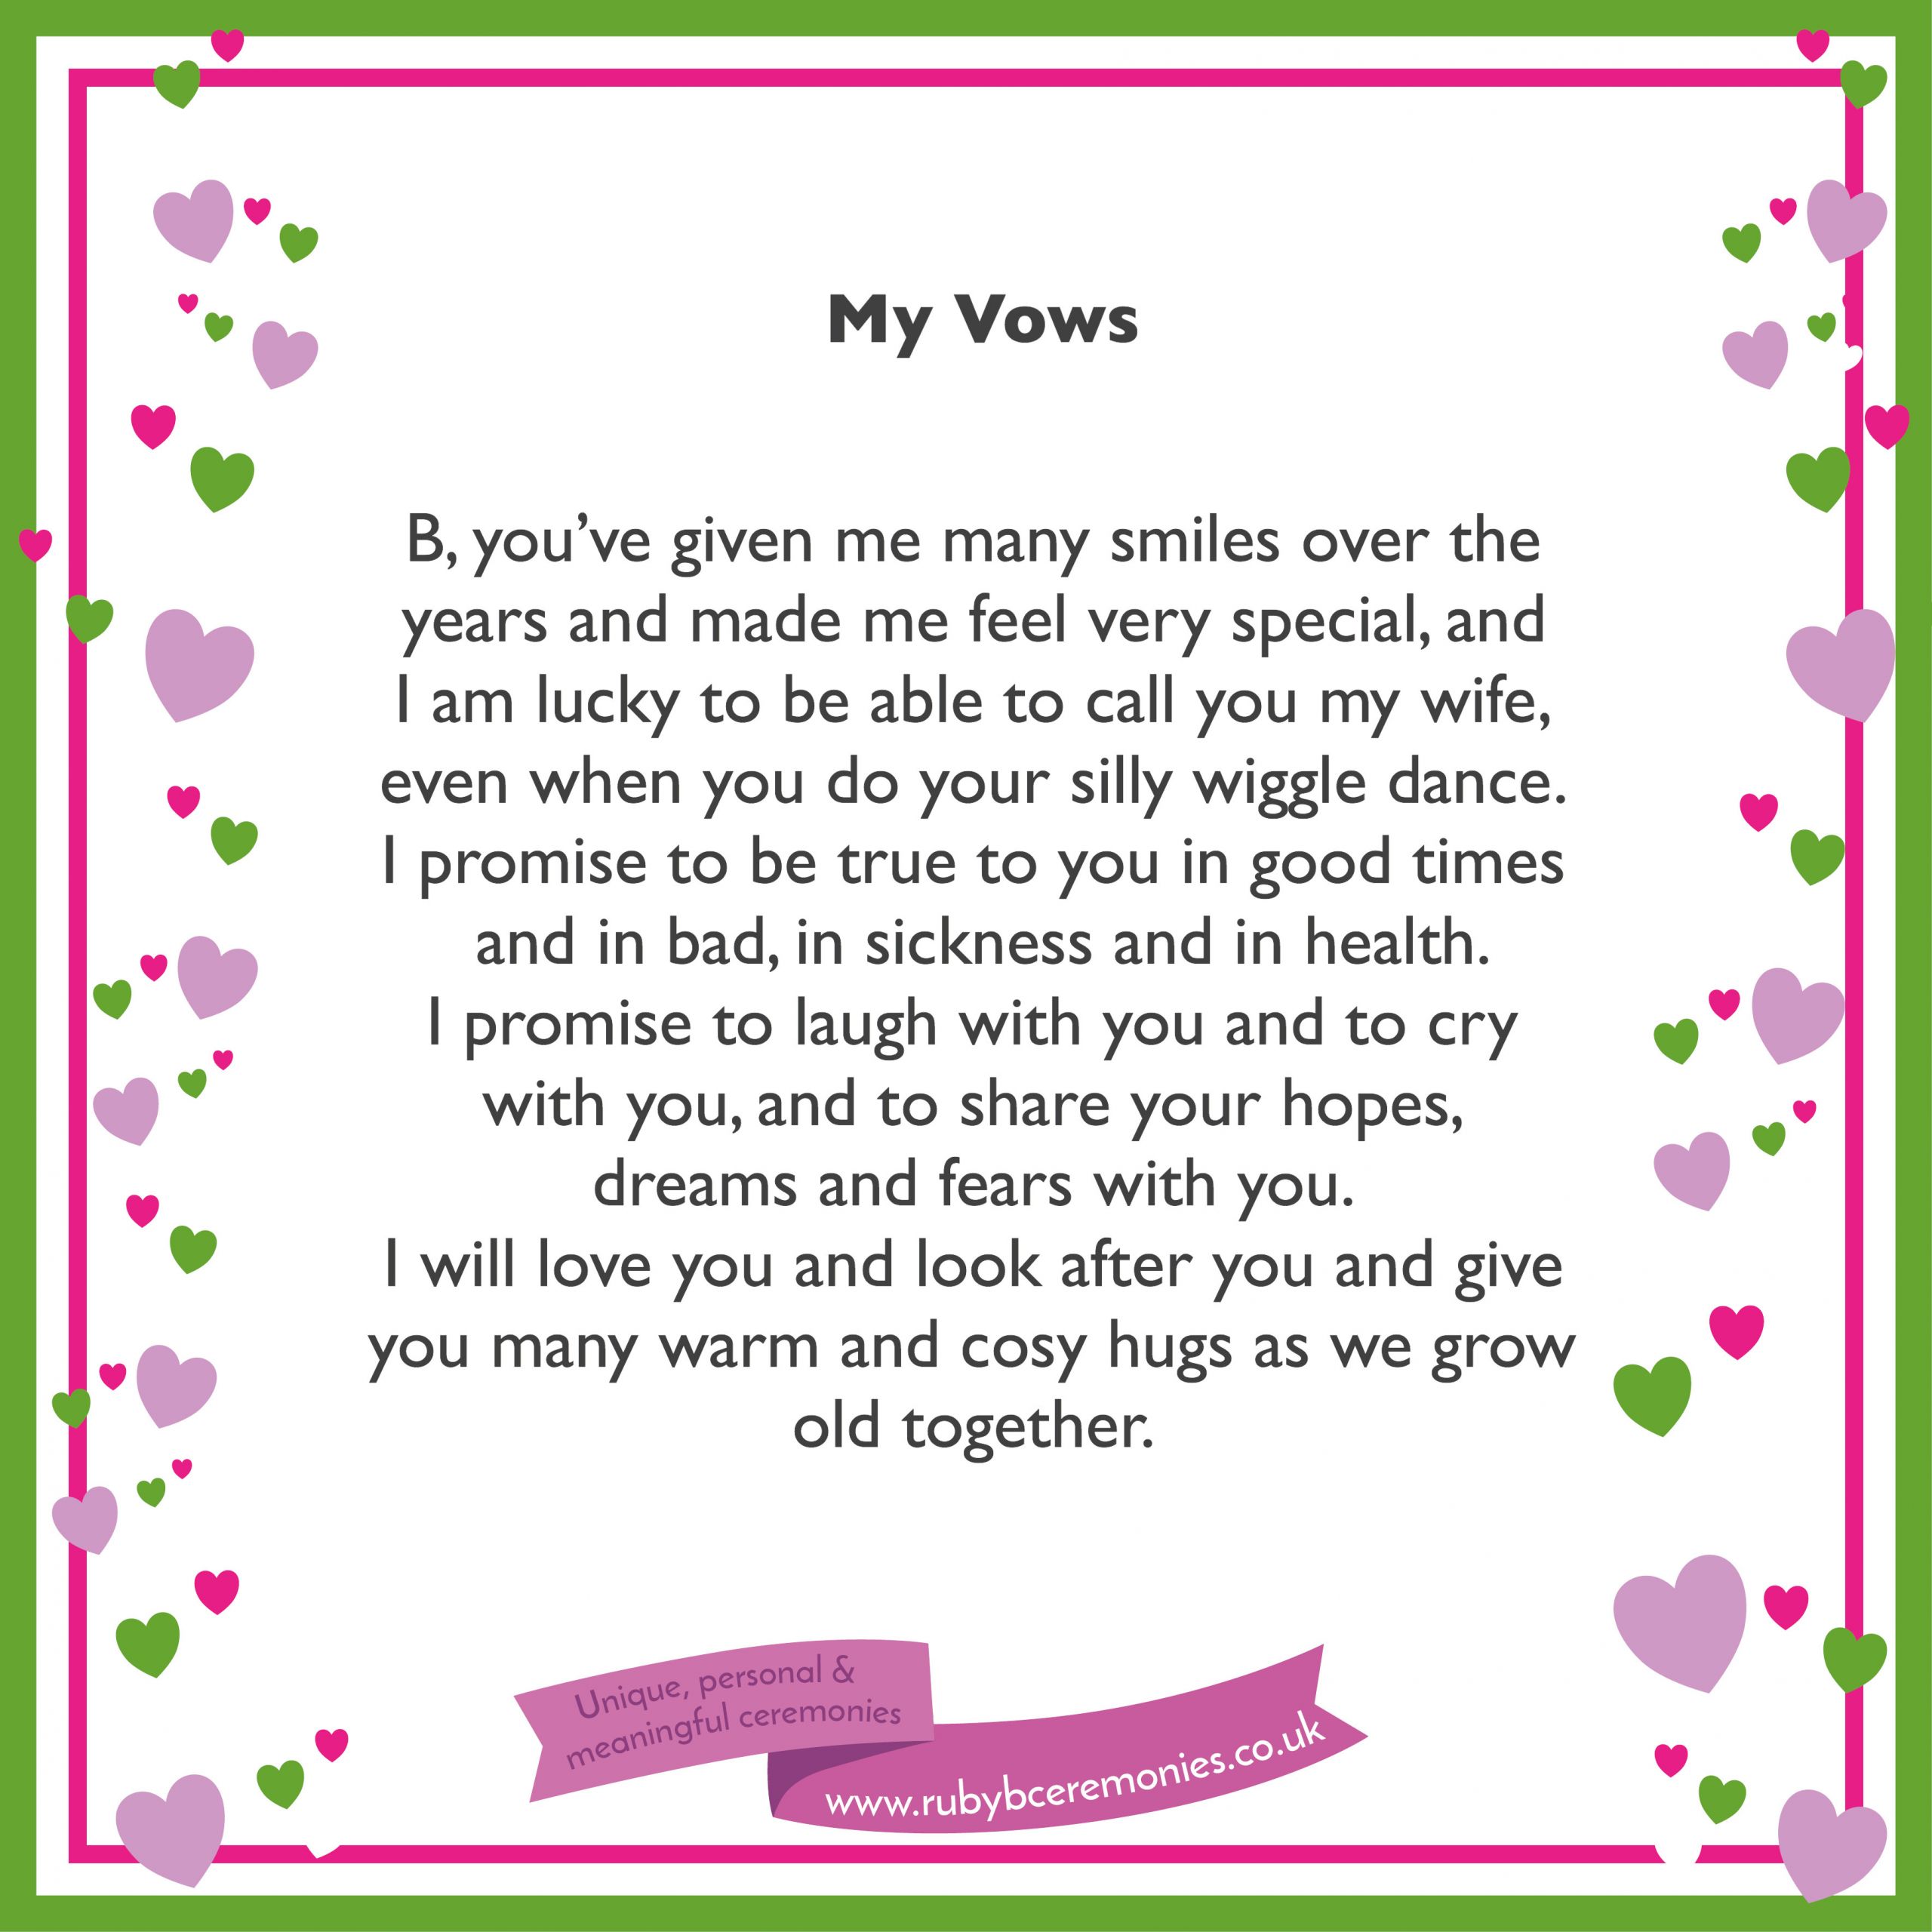 Examples Of Personal Wedding Vows
 A simple way to write your wedding vows Ruby B